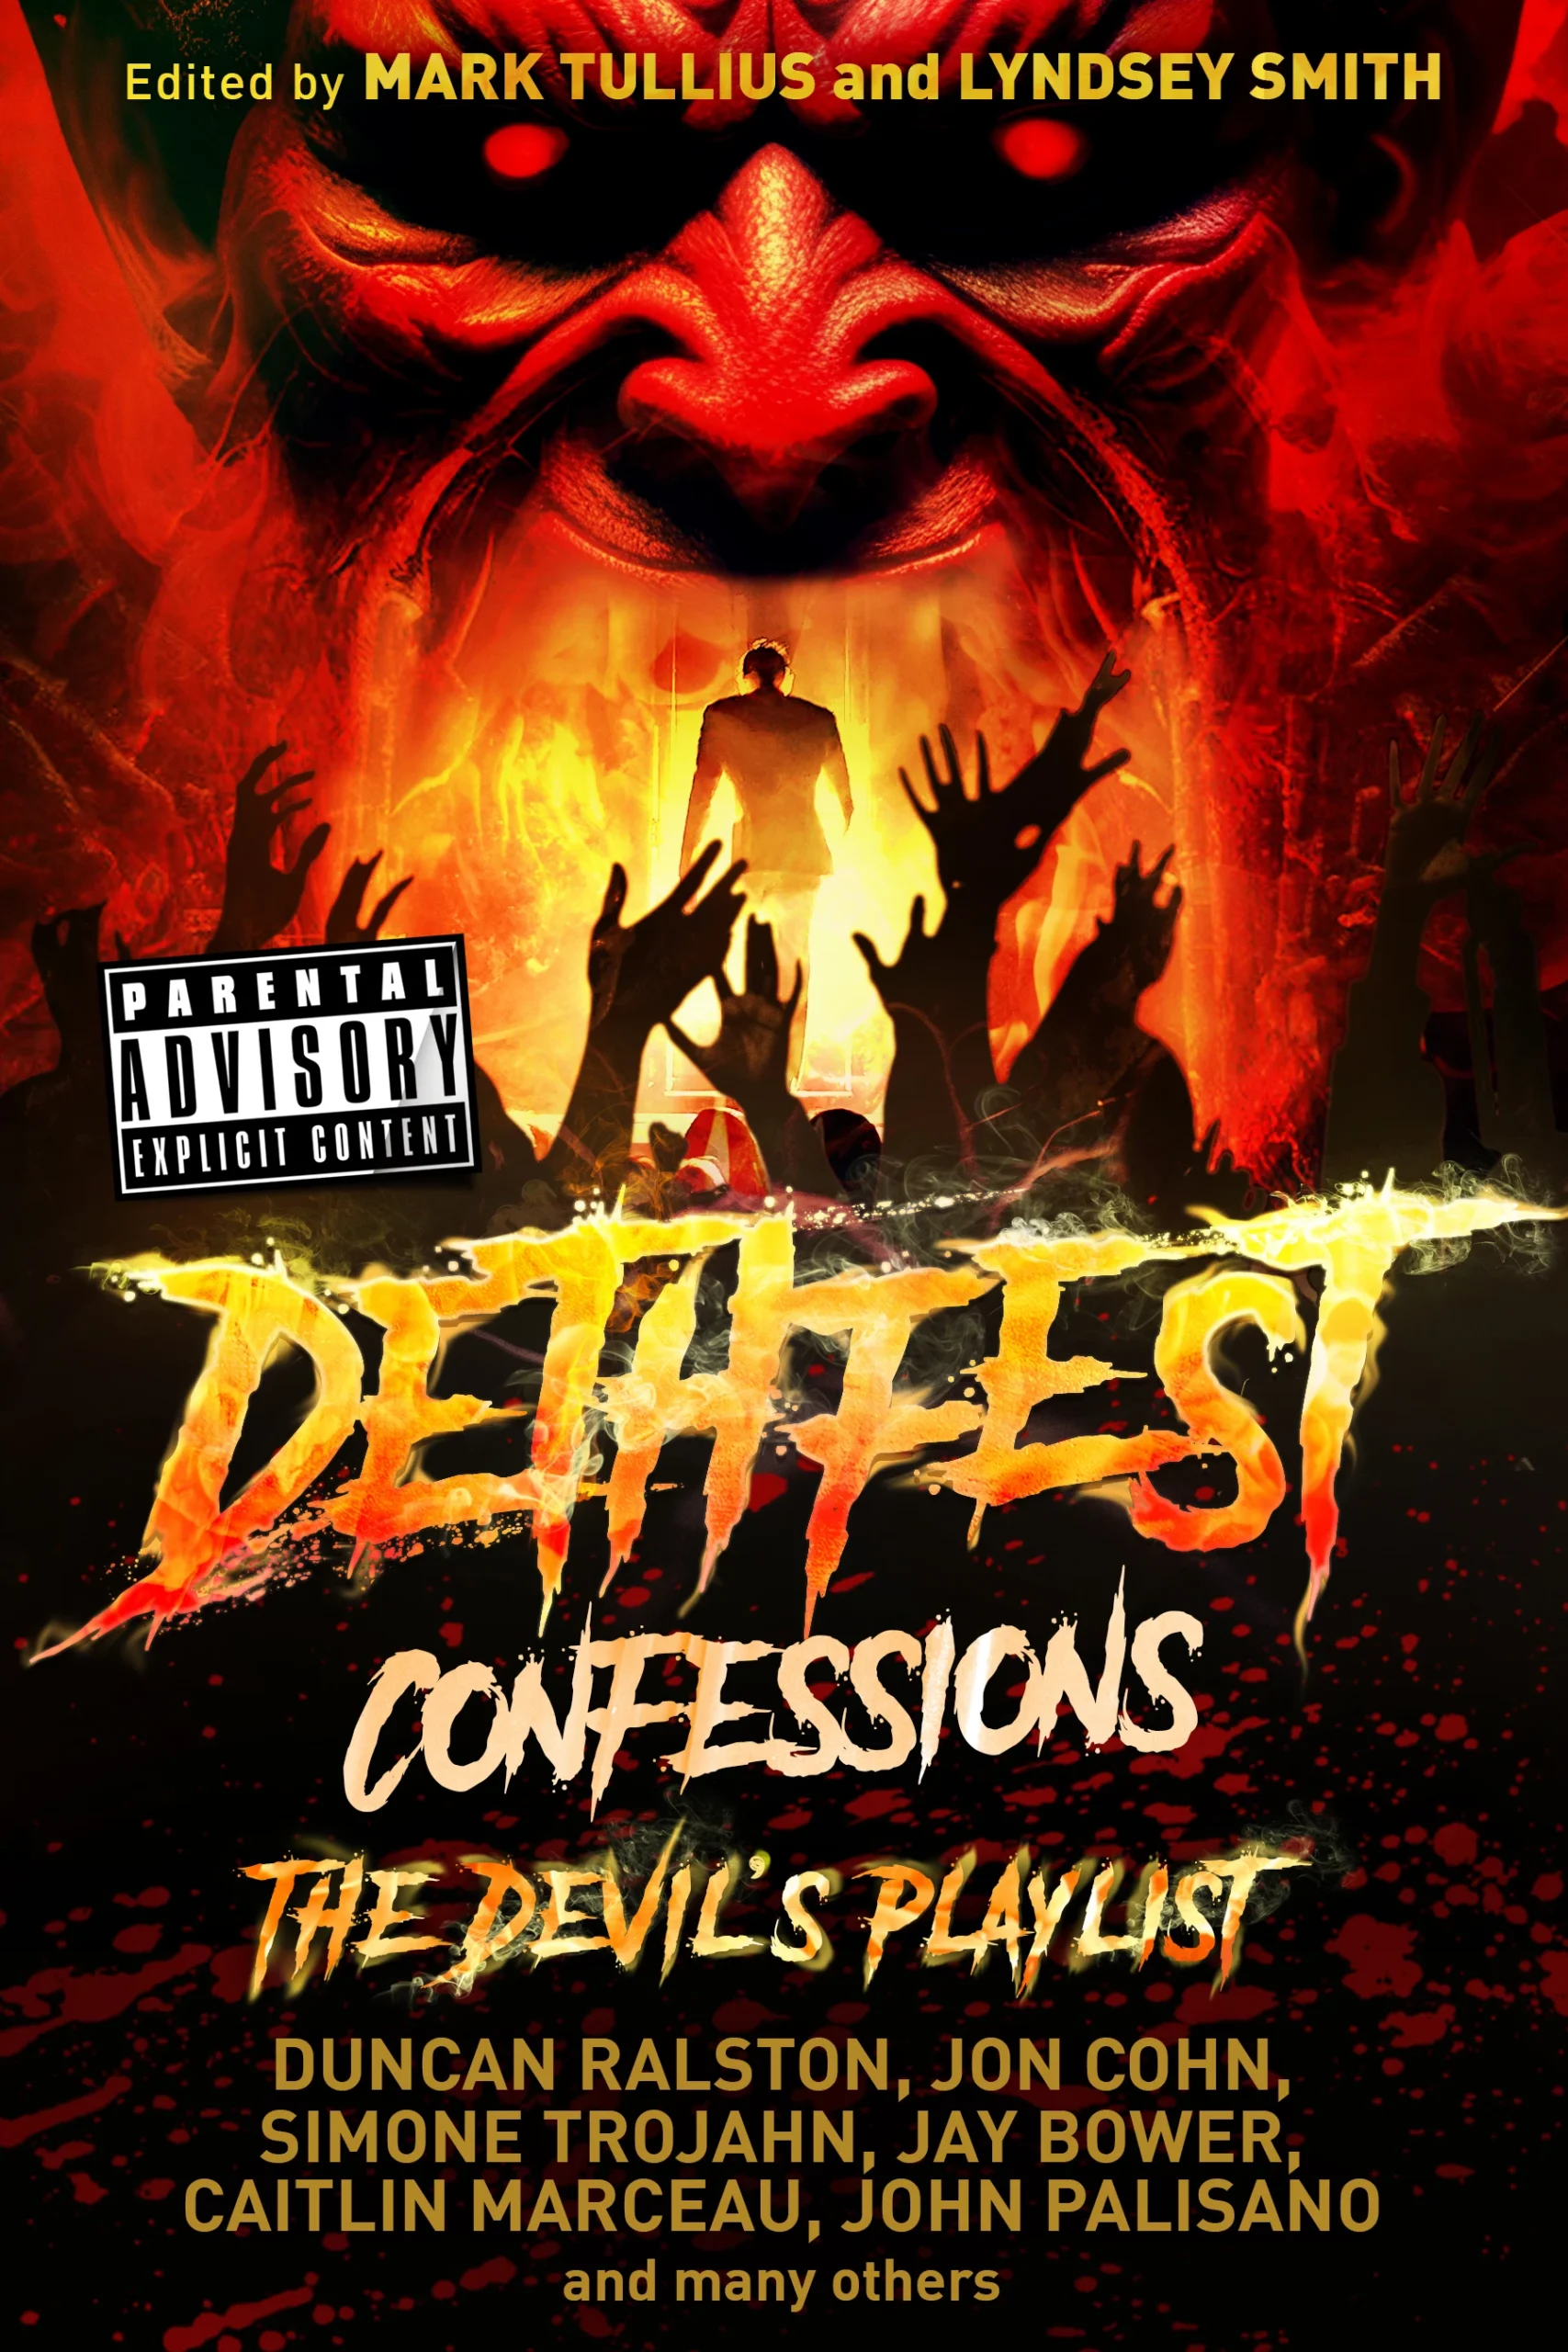 Dethfest Confessions The Devils Playlist scaled